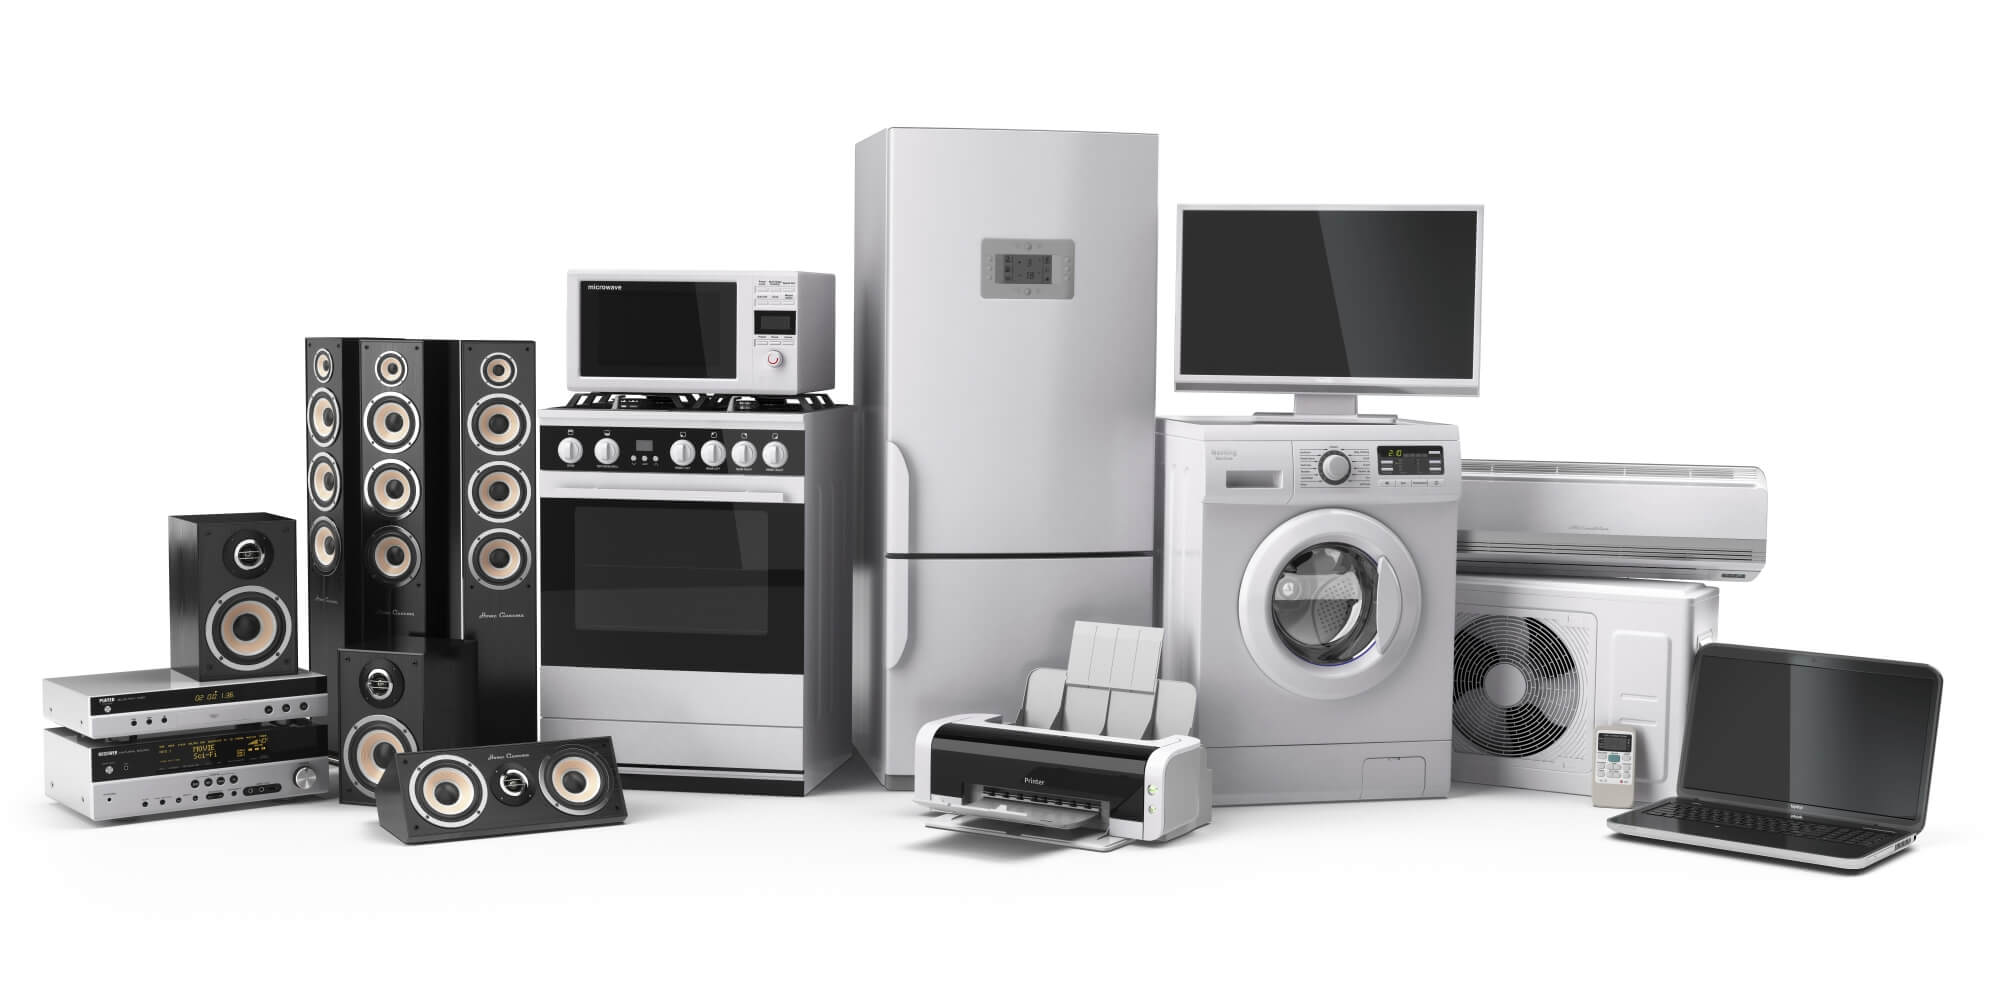 Local Witham Appliance Installation Service Thurrock